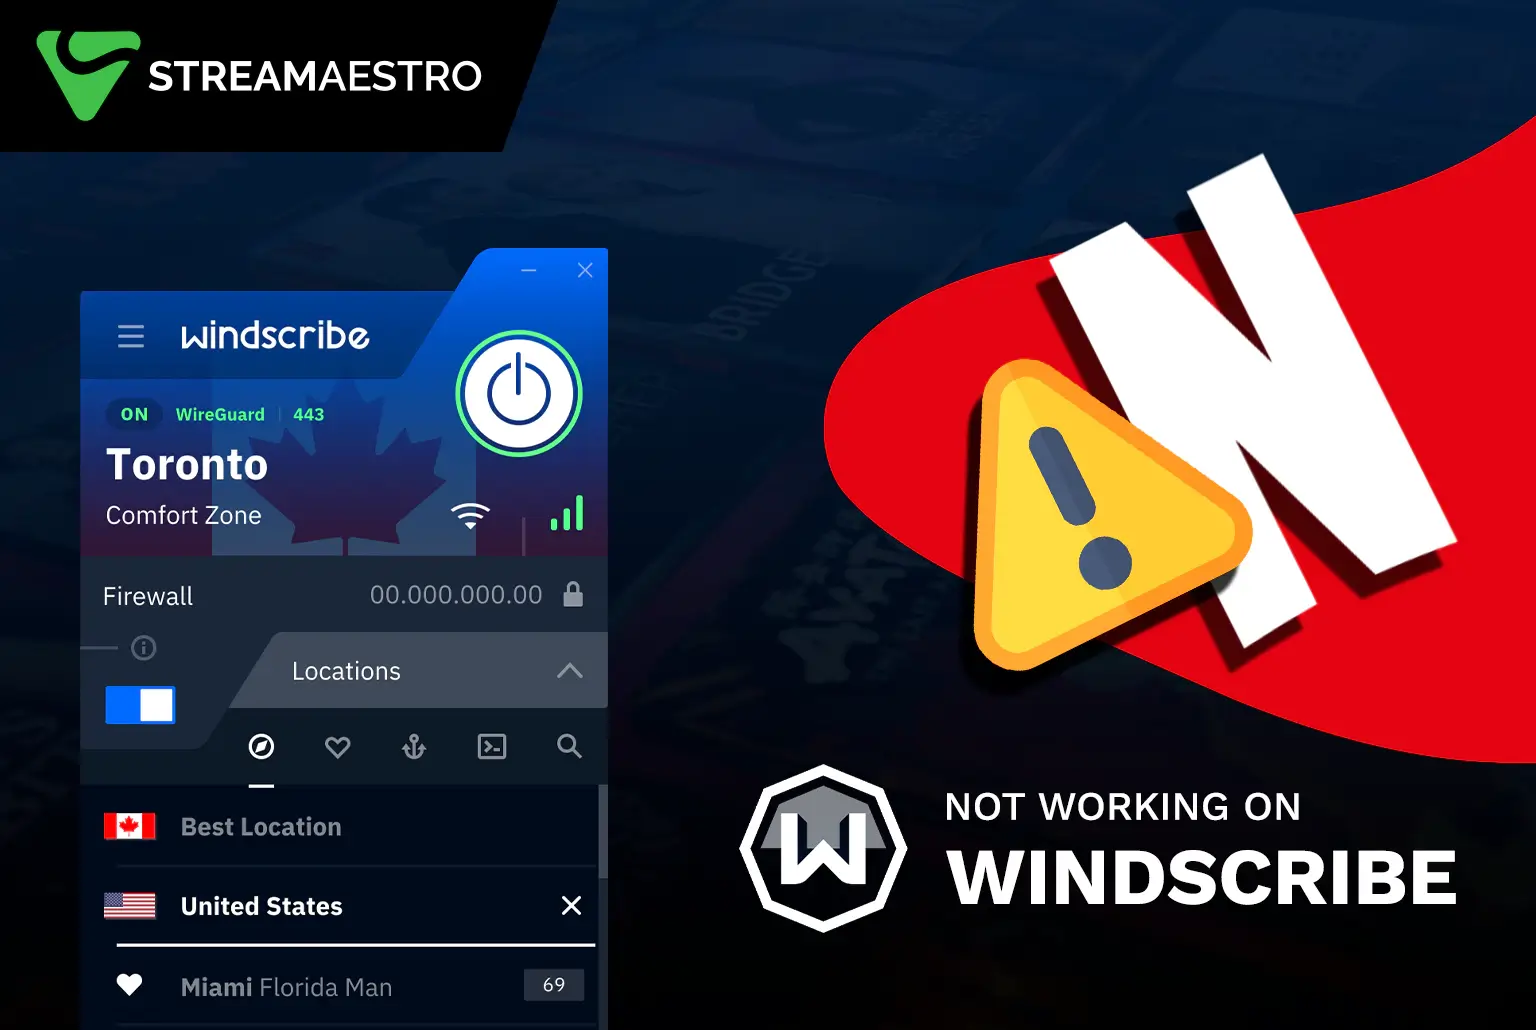 Does Windscribe Work with Netflix